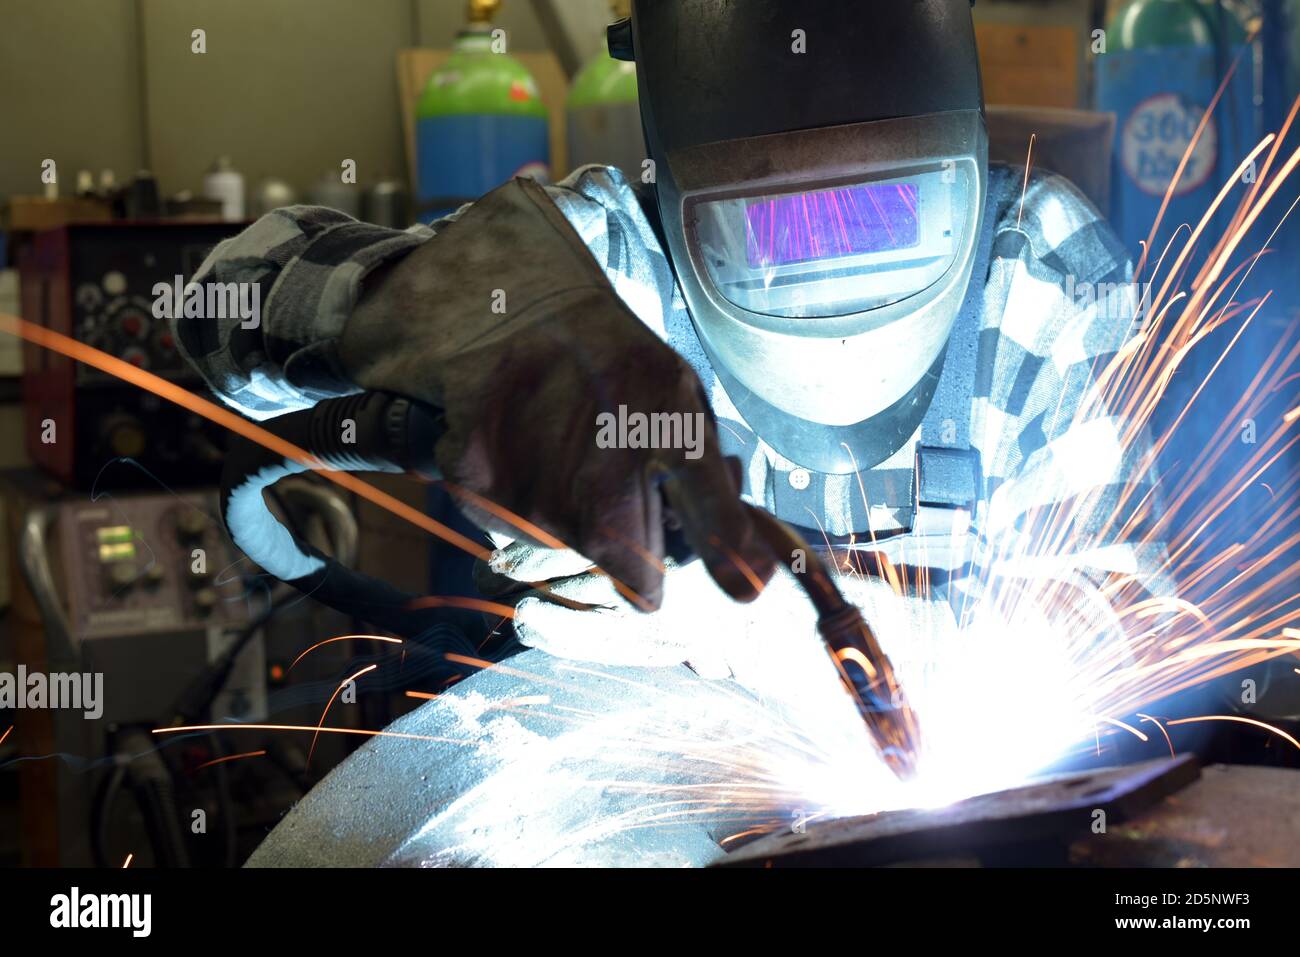 Welder in protective clothing at the workplace in an industrial company in steel construction Stock Photo